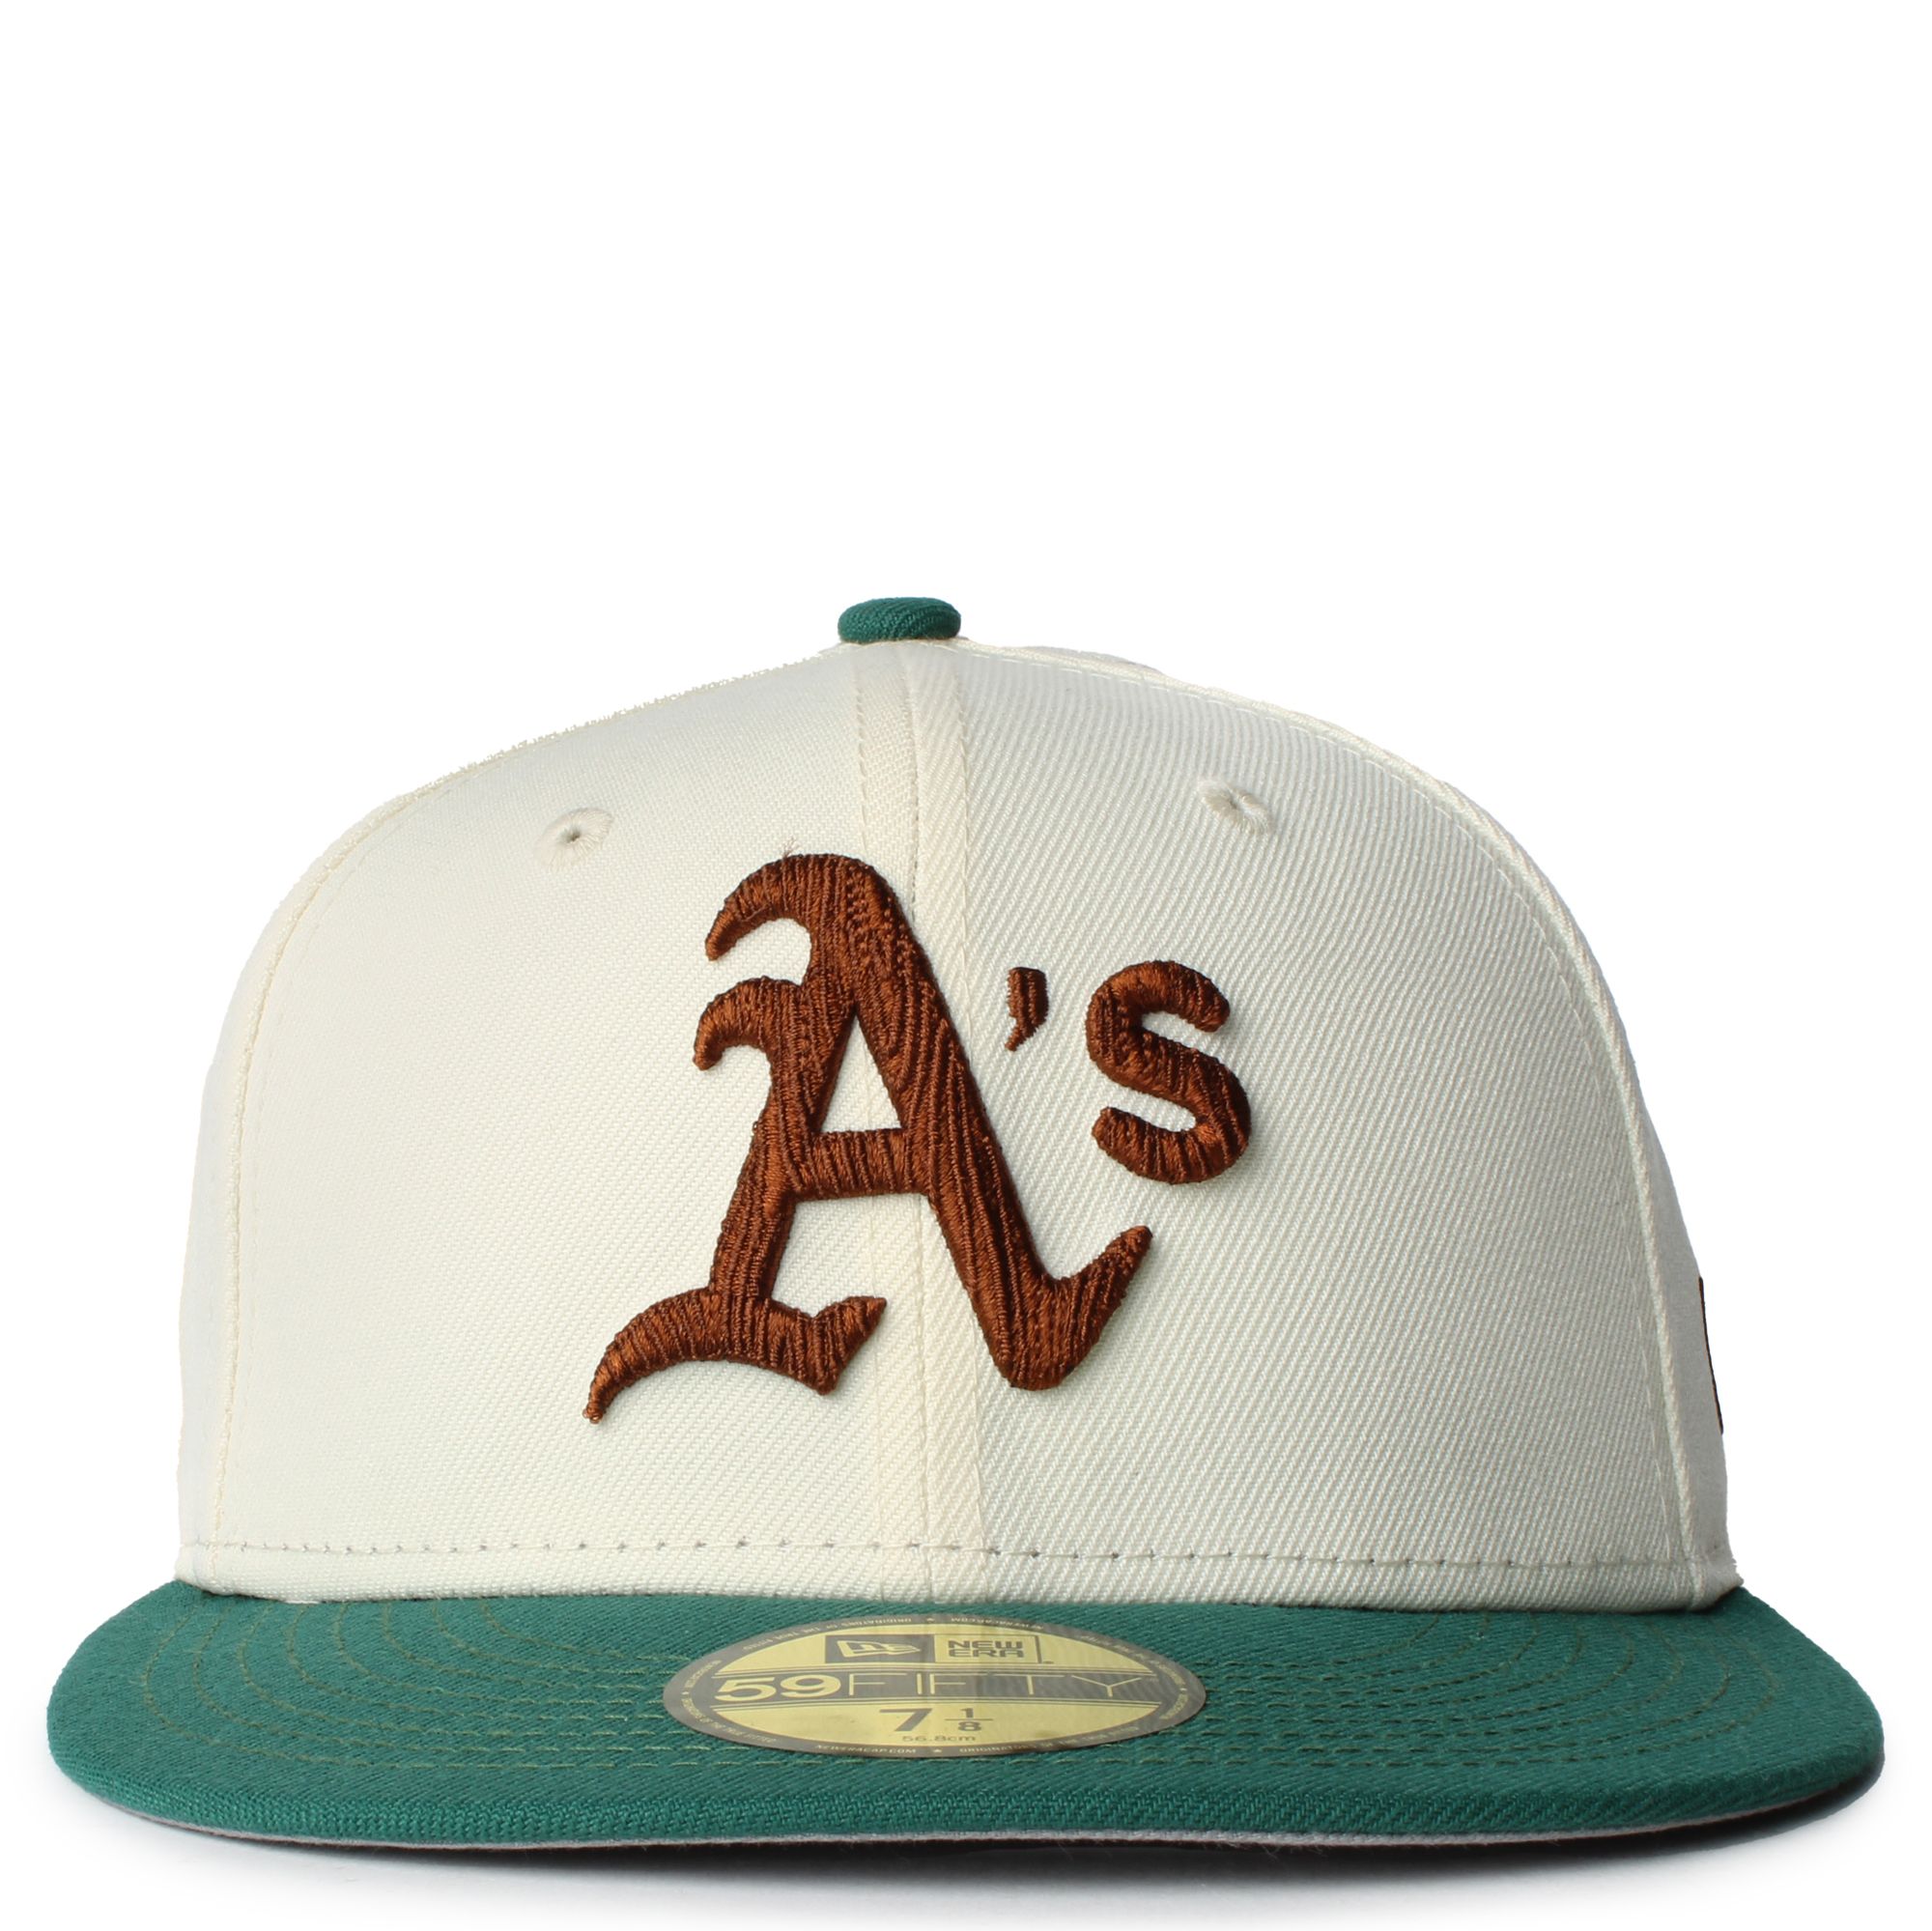 MLB New Era Oakland A's Athletics Fitted Hat Green 7 1/8 1/4 3/8 1/2 5/8 8  